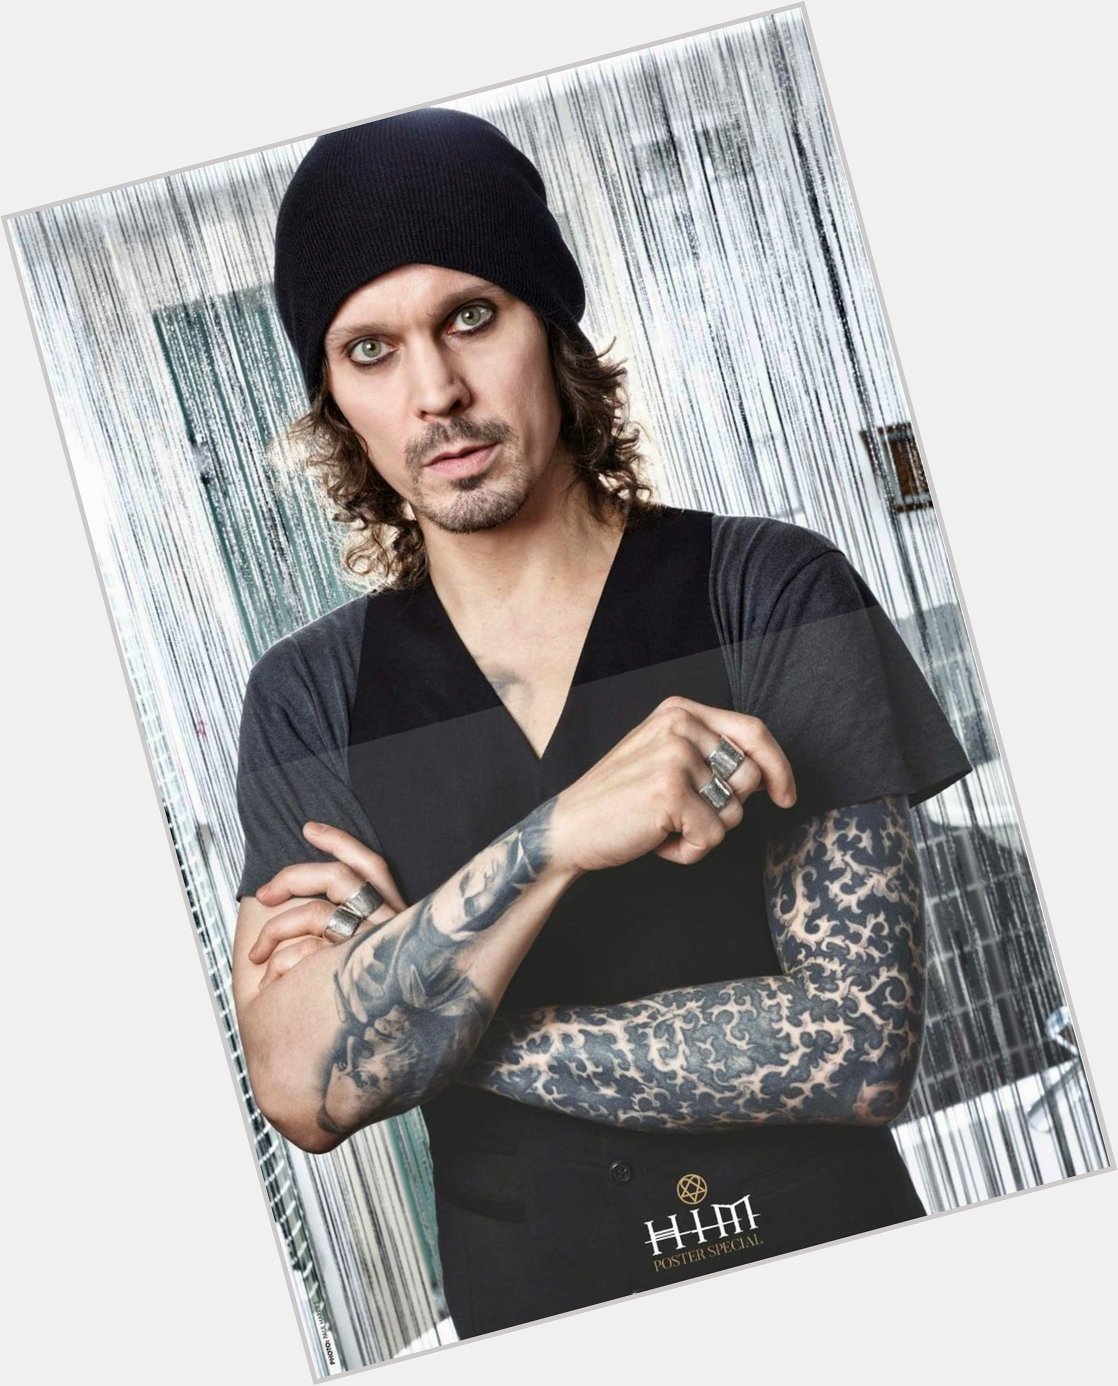 Happy birthday to Ville Valo, thank you for your music. 